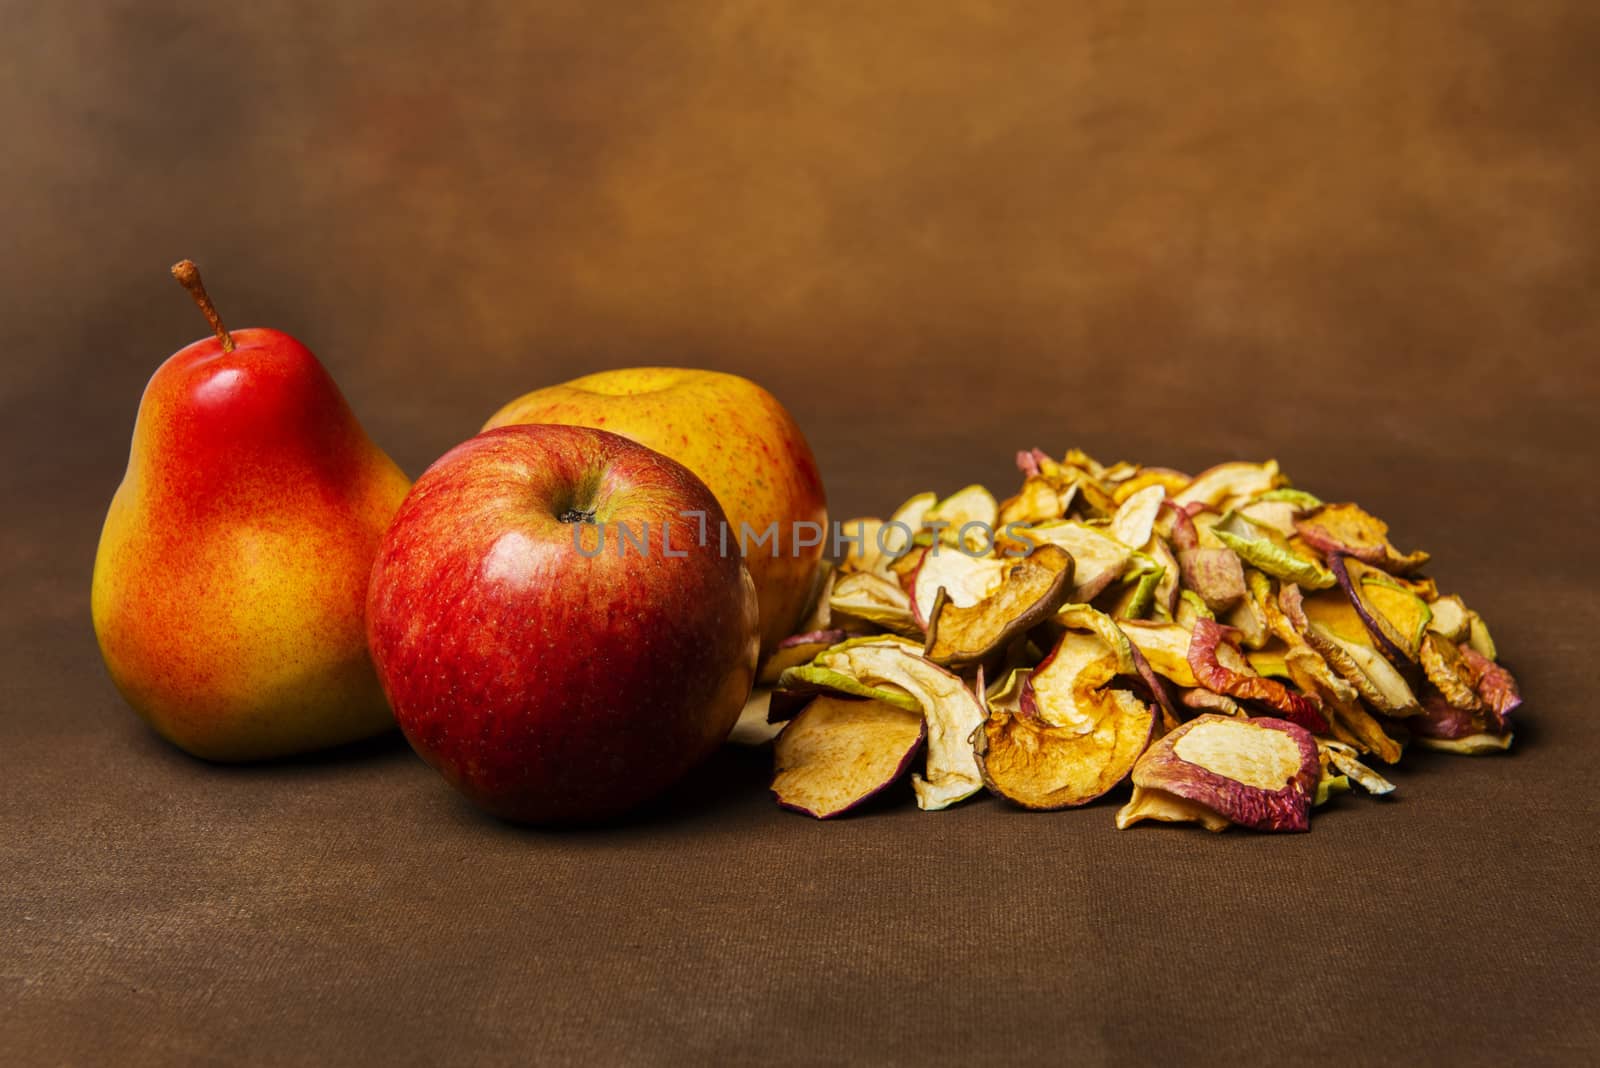 Dried apples and pears on a brown background by fyletto